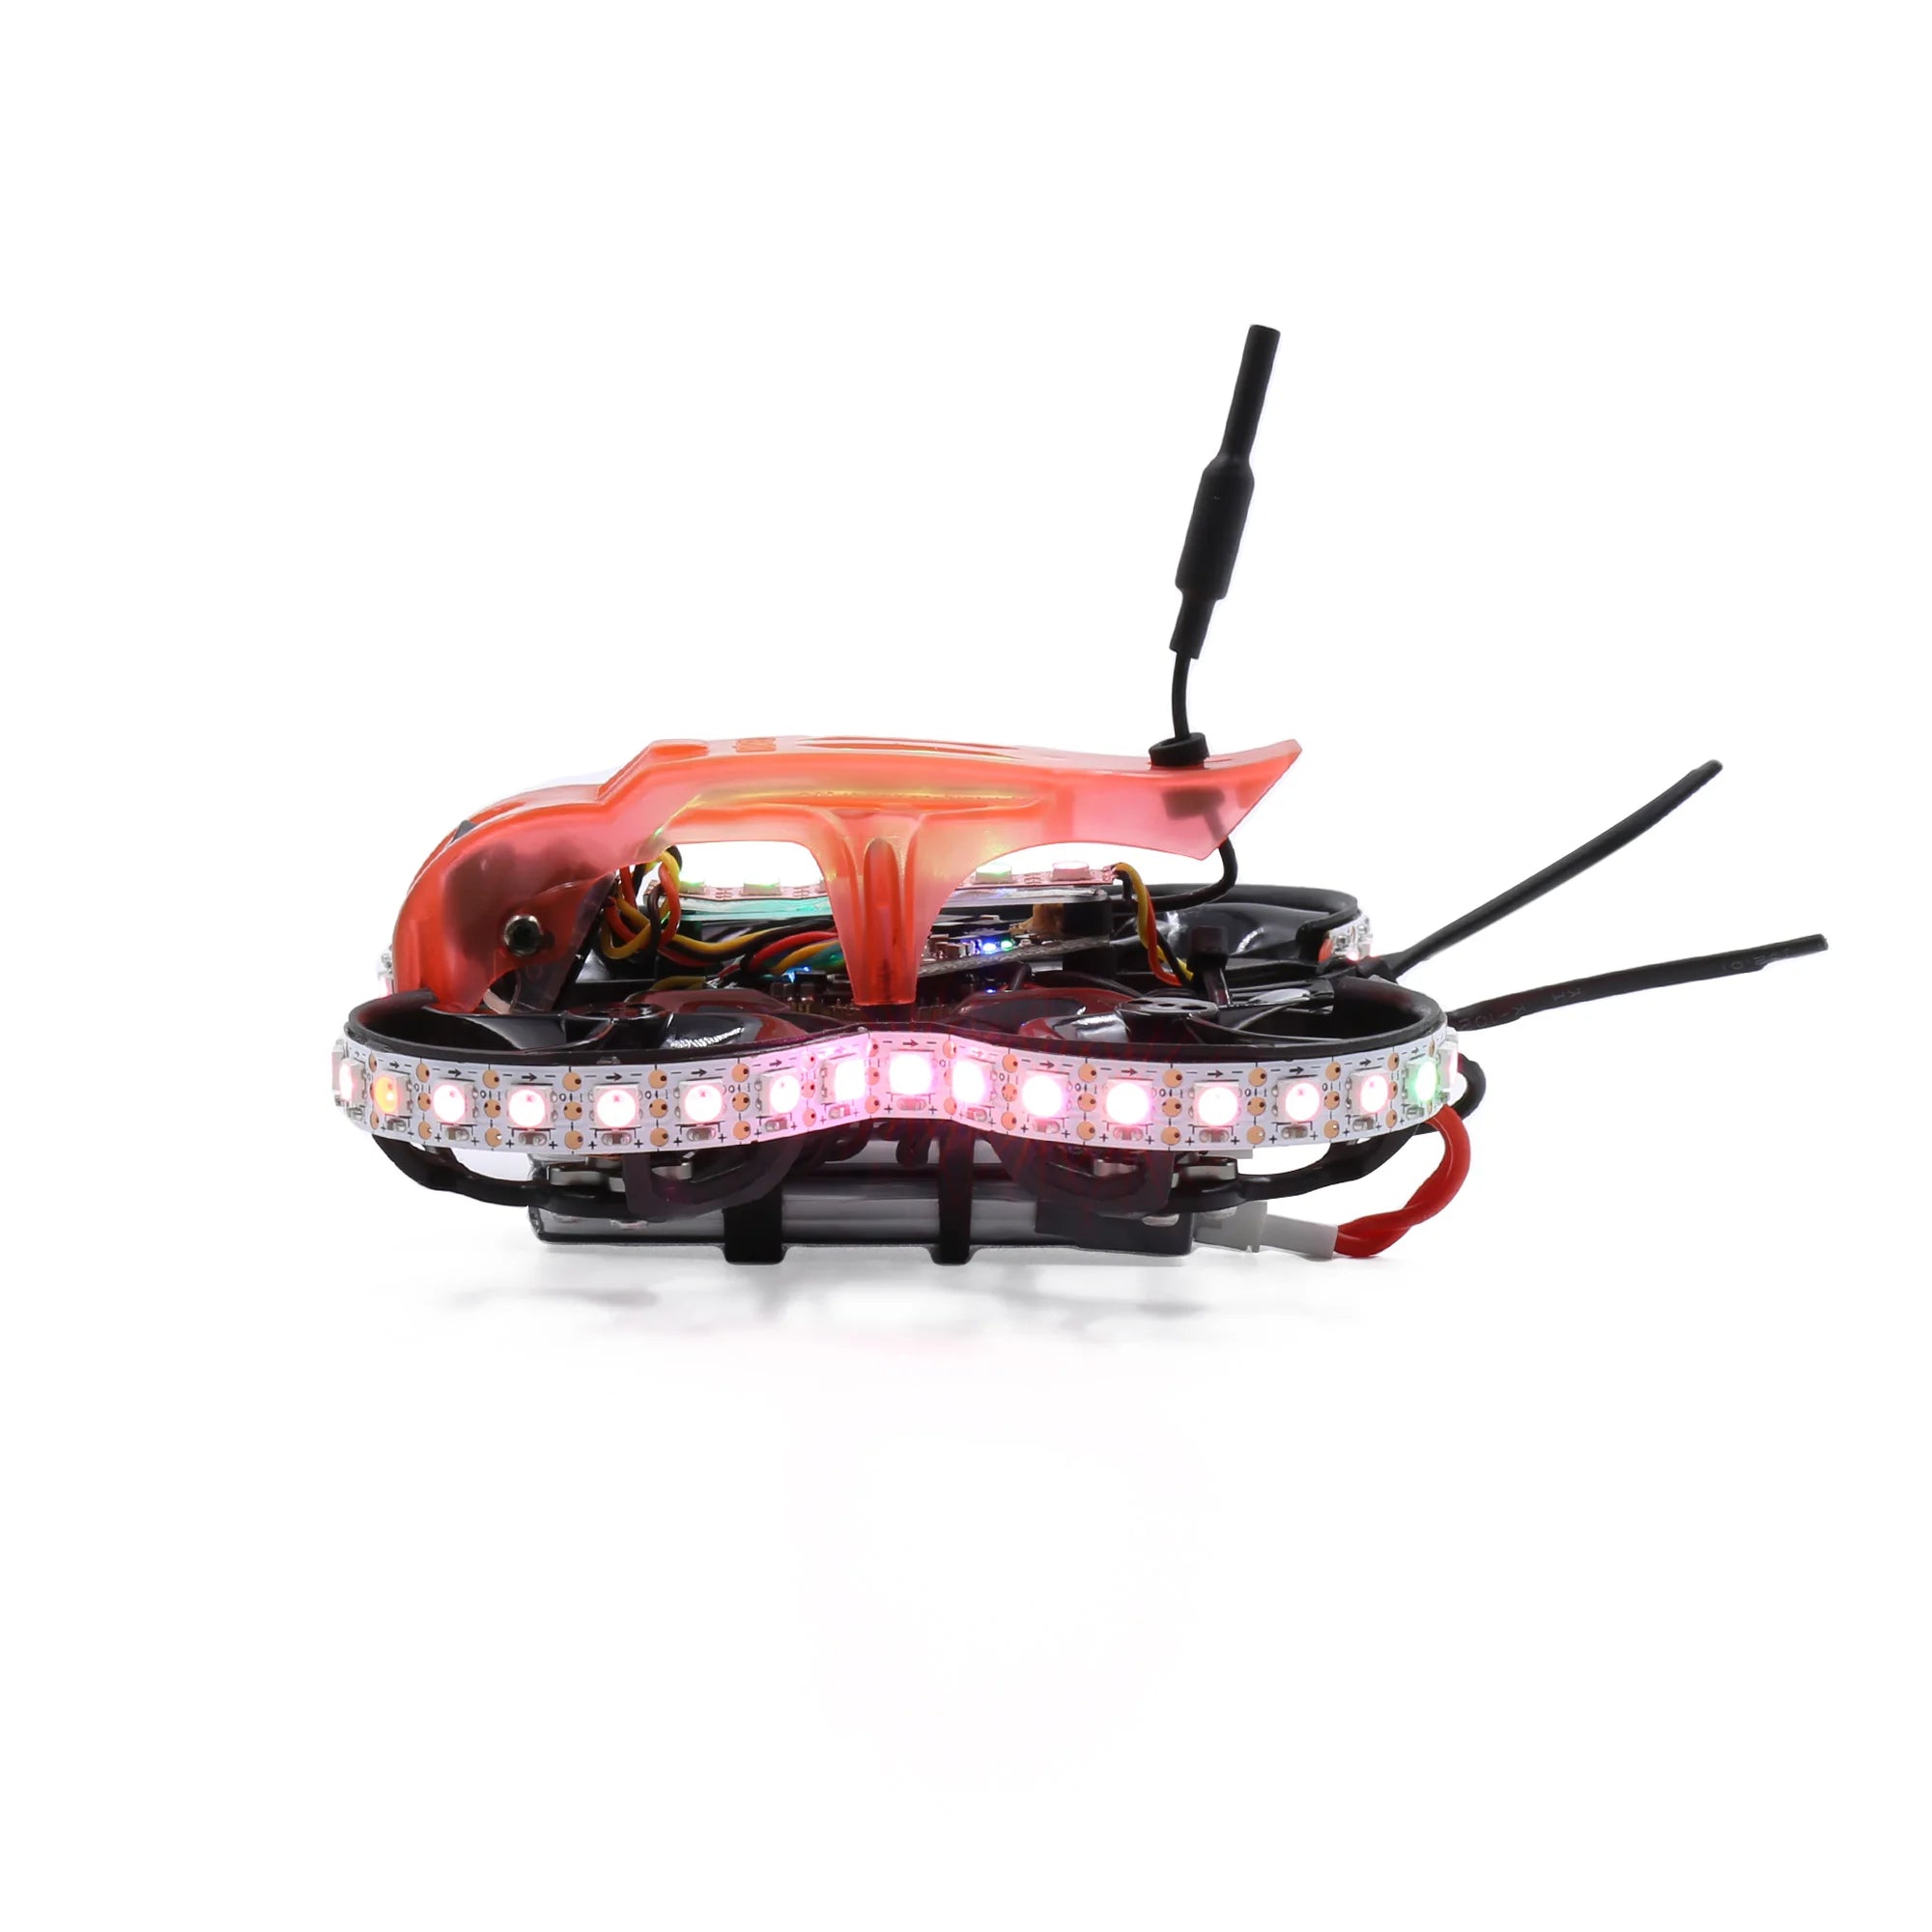 GEPRC TinyGO LED  Whoop RTF FPV Drone, GEPRC TinyGo LED FPV Whoop is a full-color